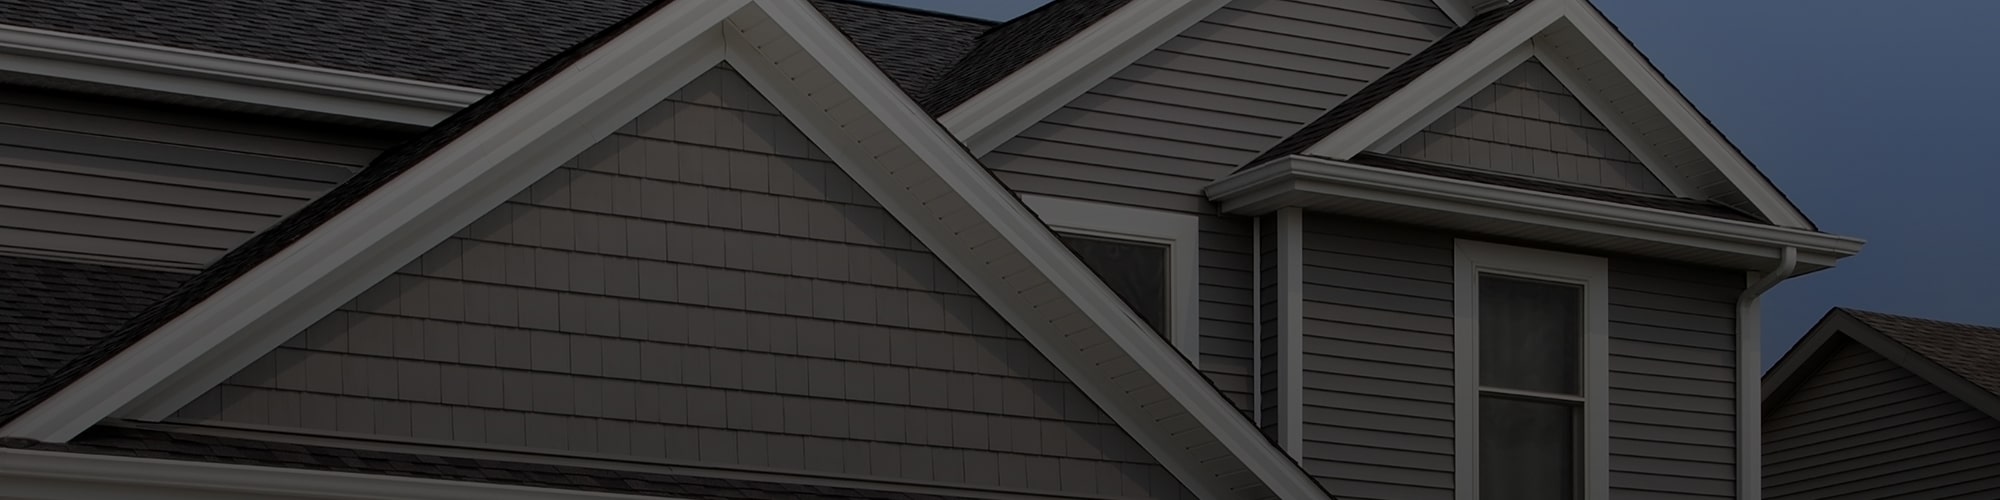 Get financing for your next siding project through Premier 